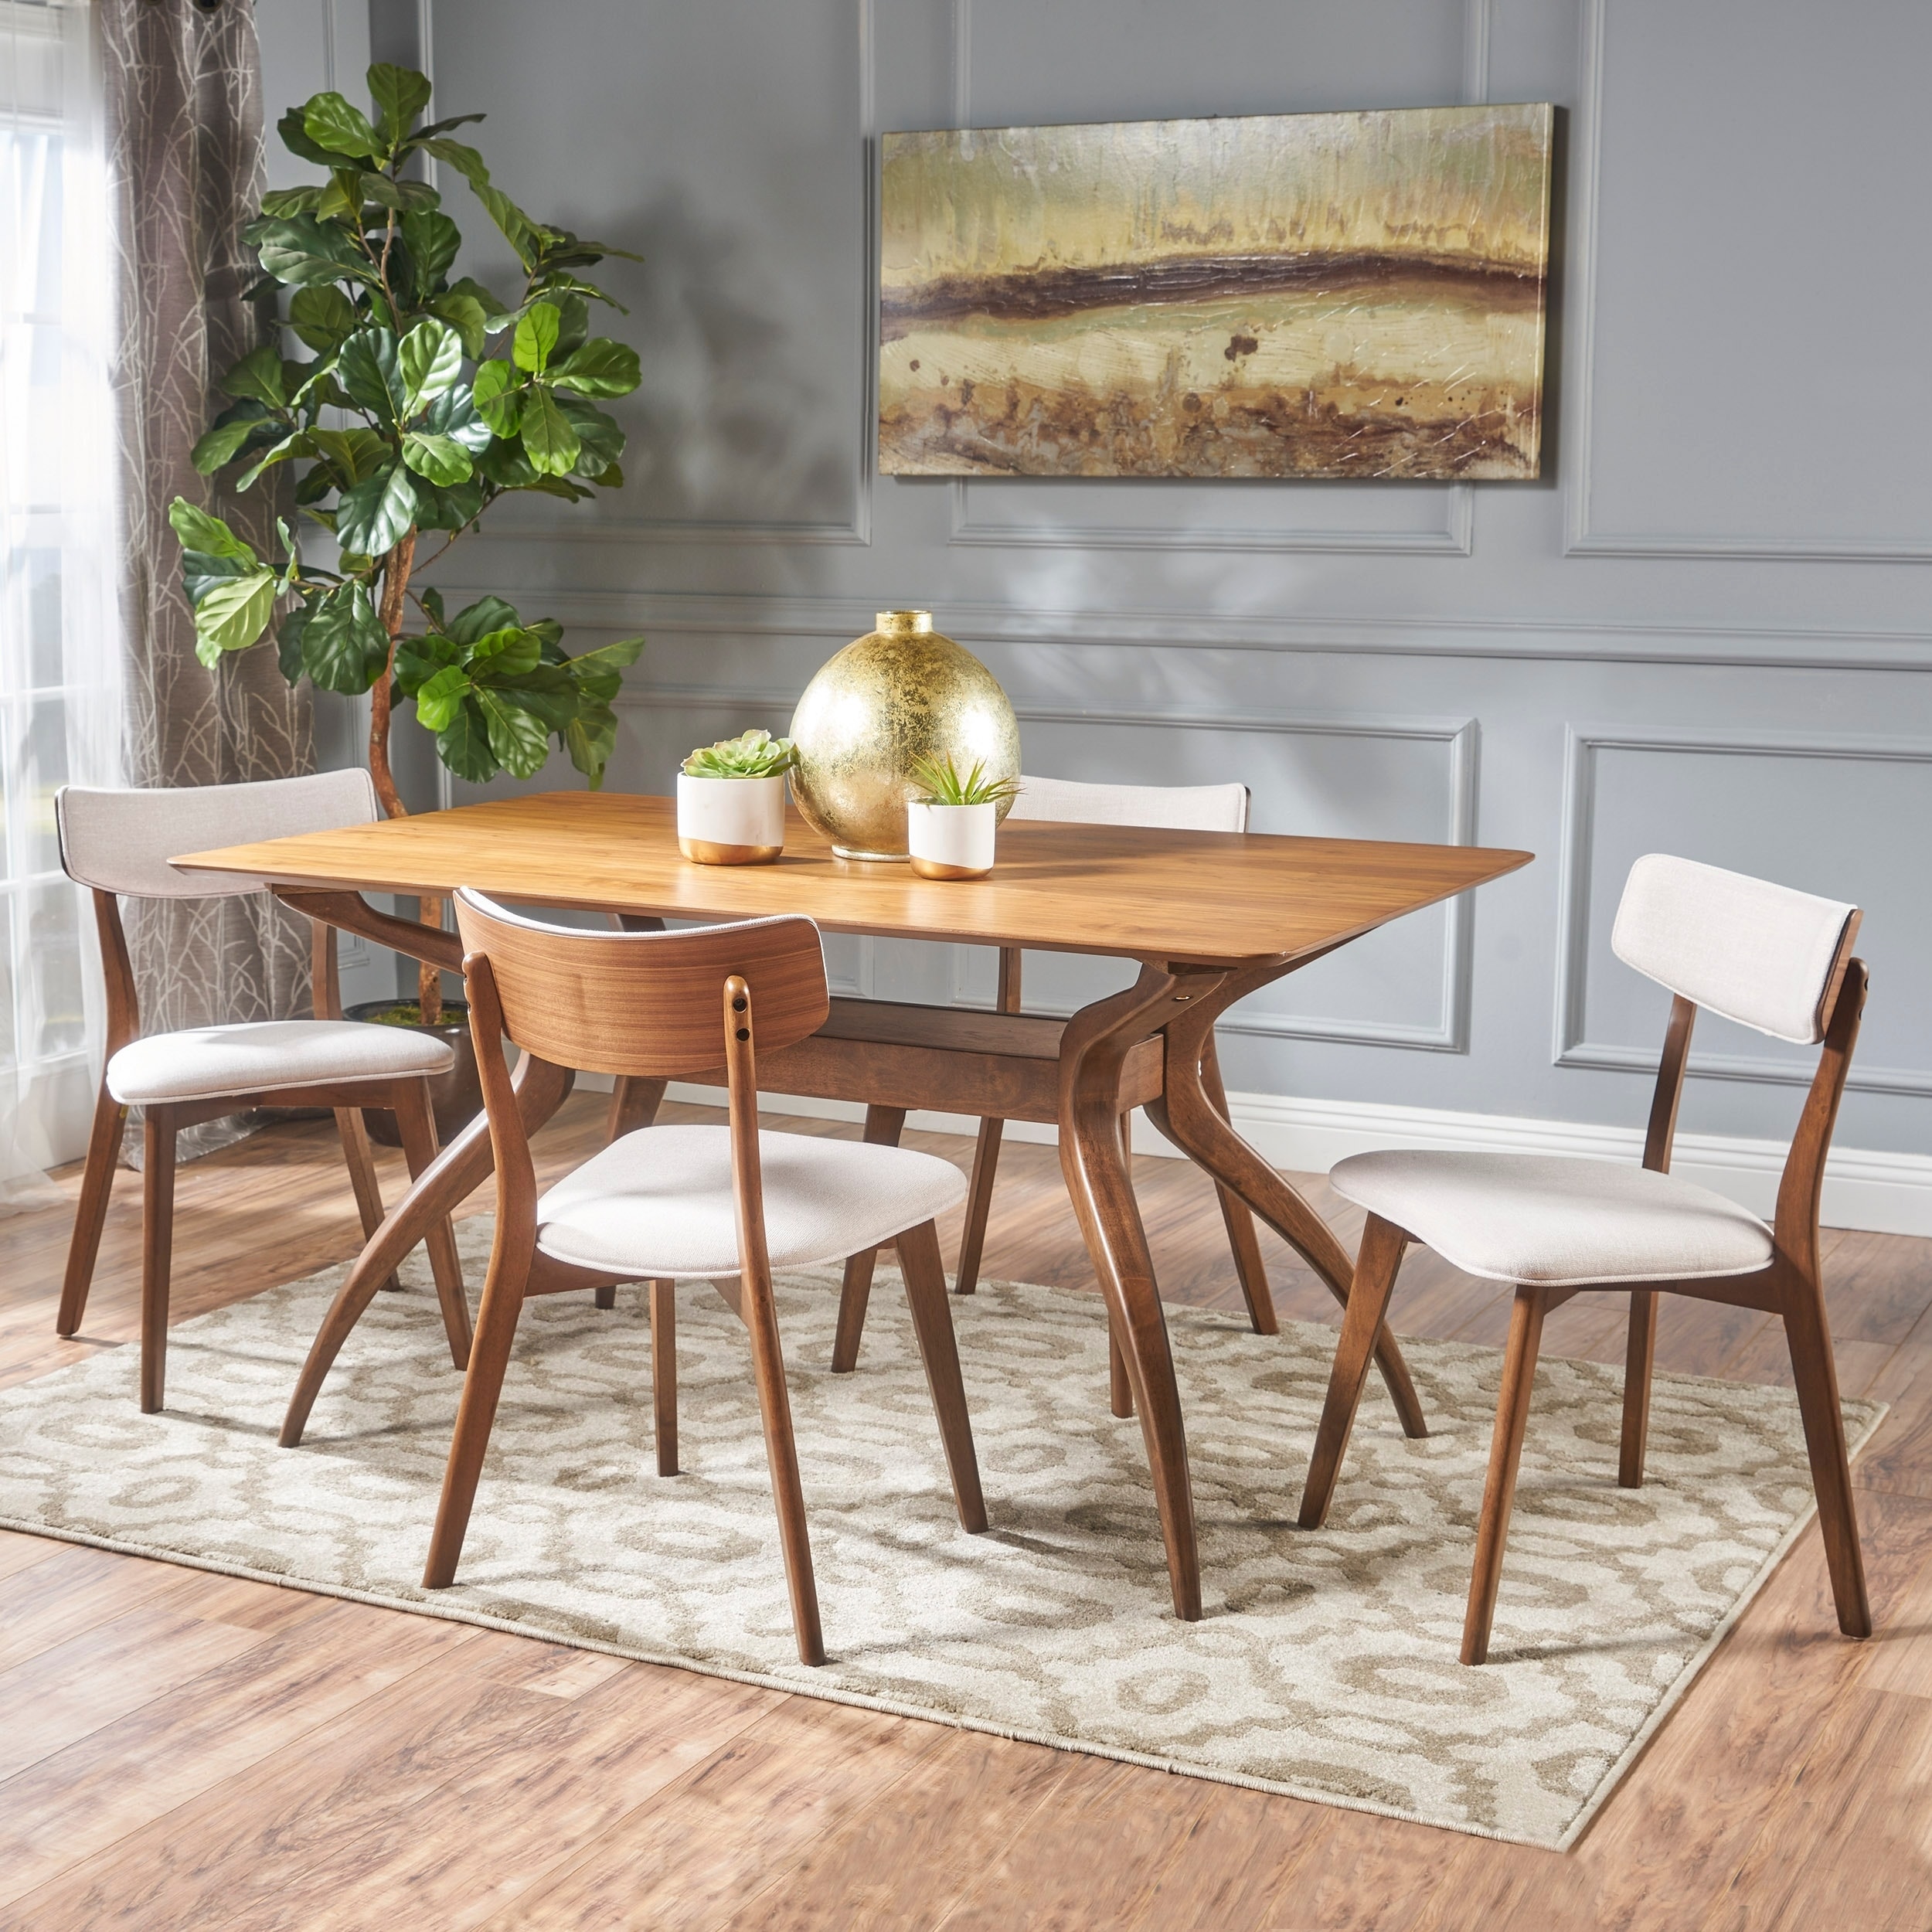 https://ak1.ostkcdn.com/images/products/17156874/Nissie-Mid-Century-5-piece-Wood-Rectangle-Dining-Set-by-Christopher-Knight-Home-3259cdc6-e099-4f1b-a35e-a5aa15043dc3.jpg